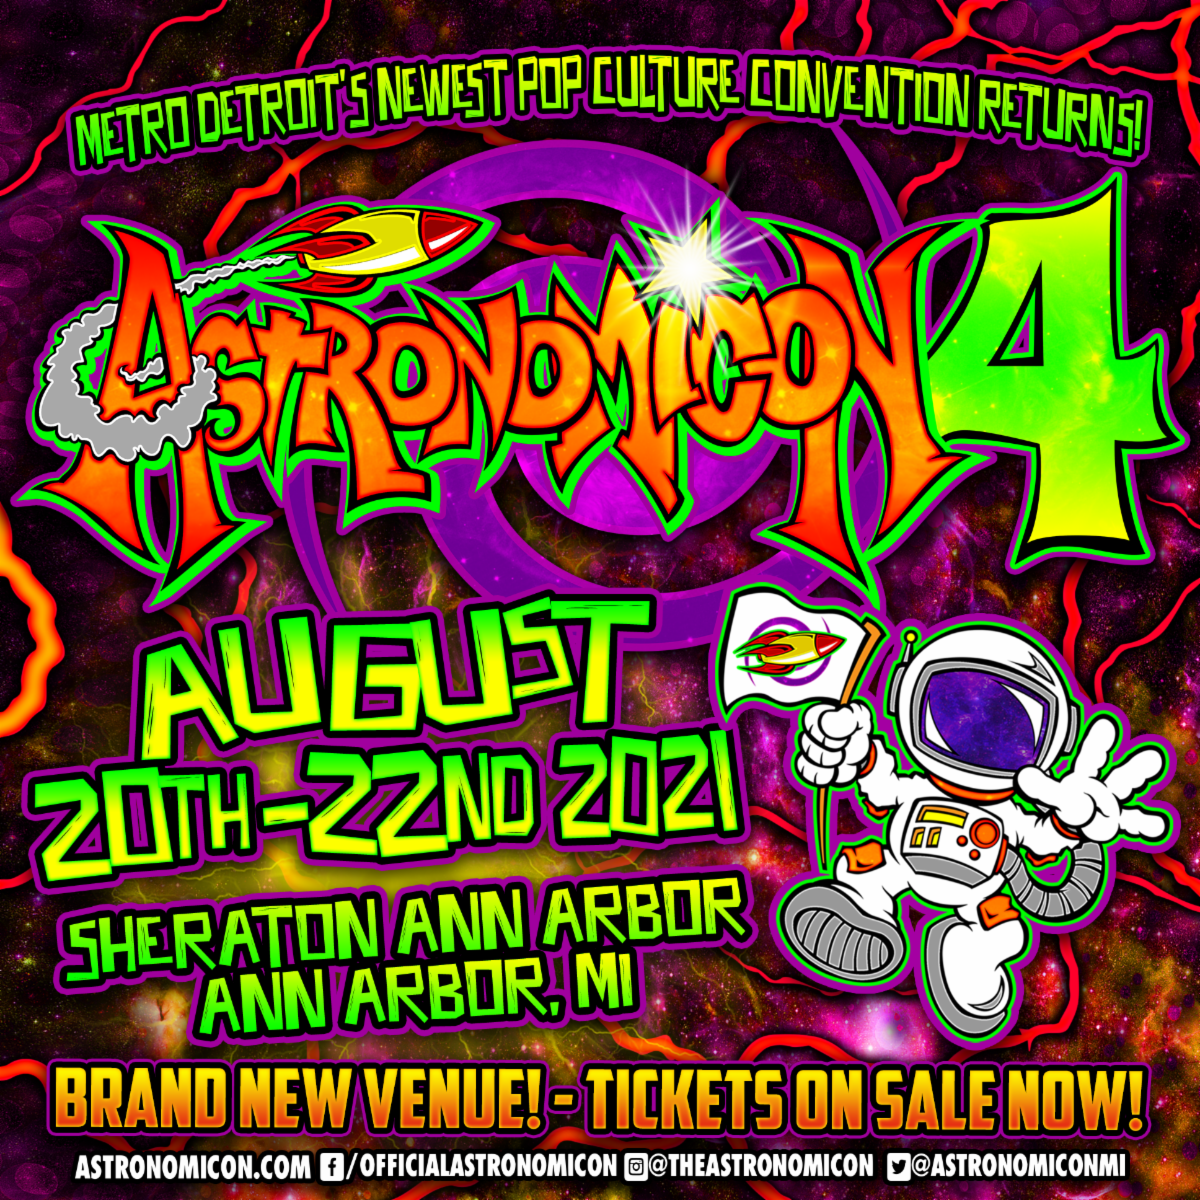 Twiztid's 'Astronomicon 4' Pop Culture Convention Details And First Guests Revealed